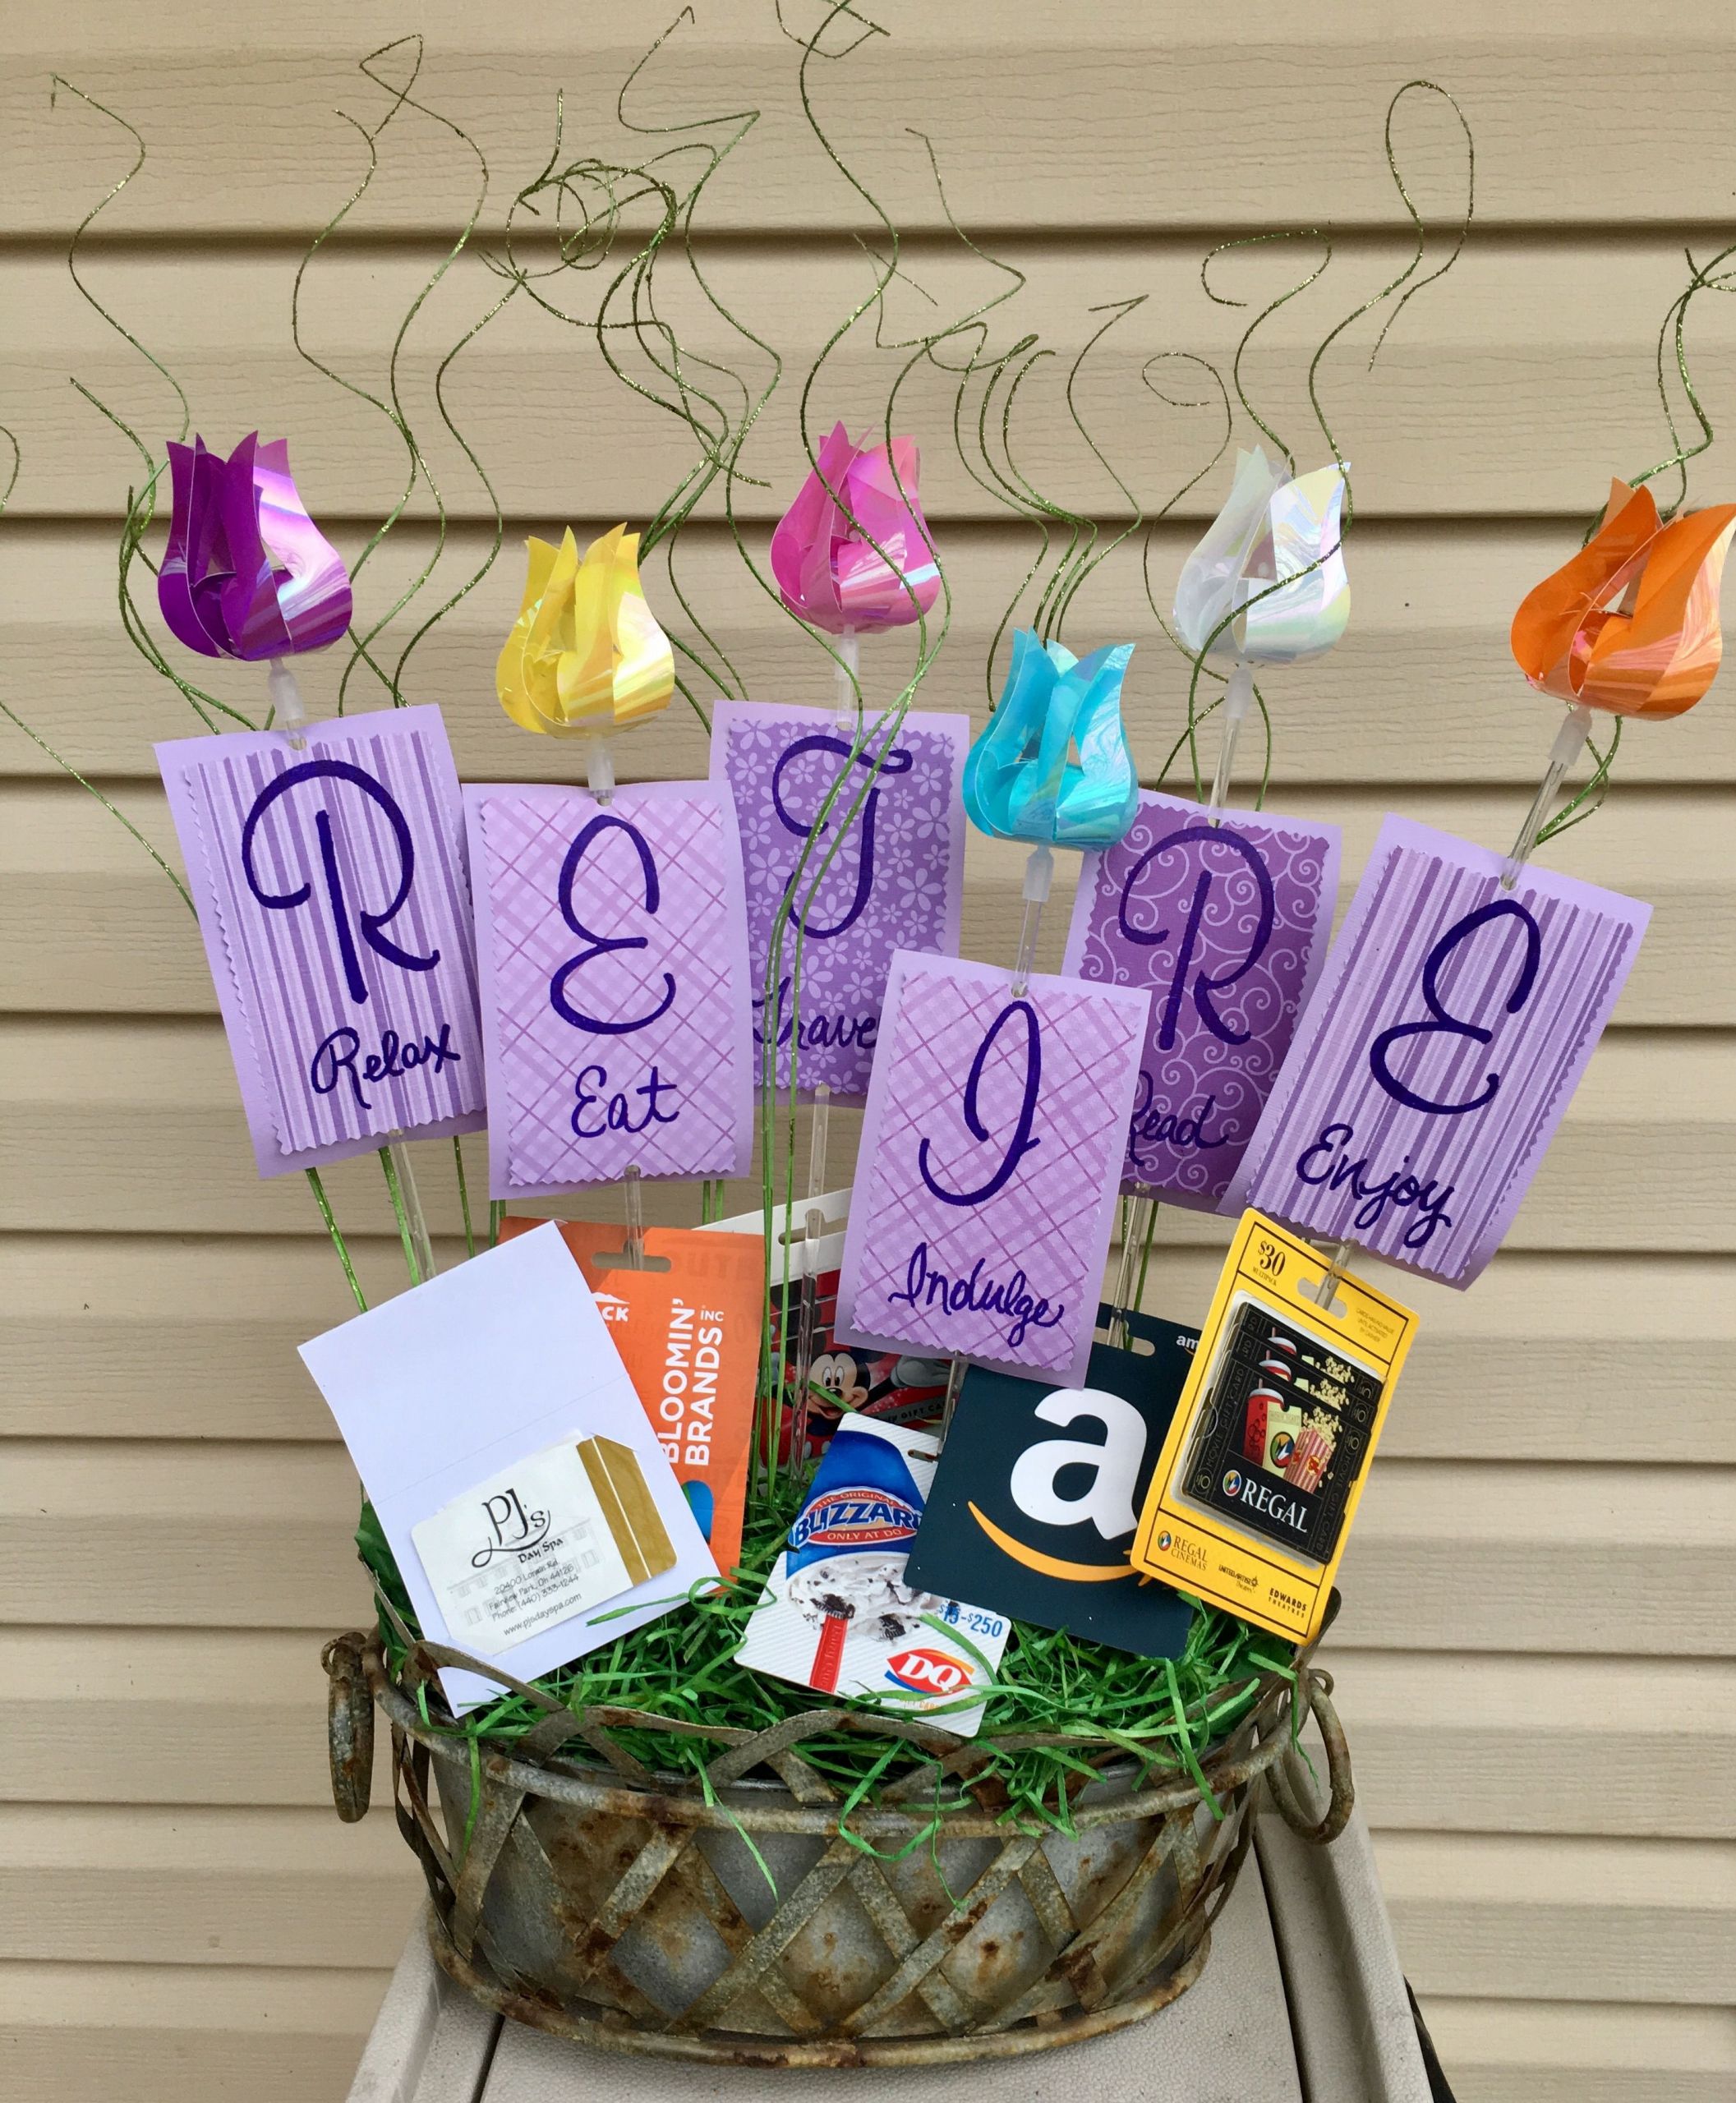 Retirement Party Gift Ideas
 Retirement t basket with t cards Relax Eat Travel Indulge Read Enjoy